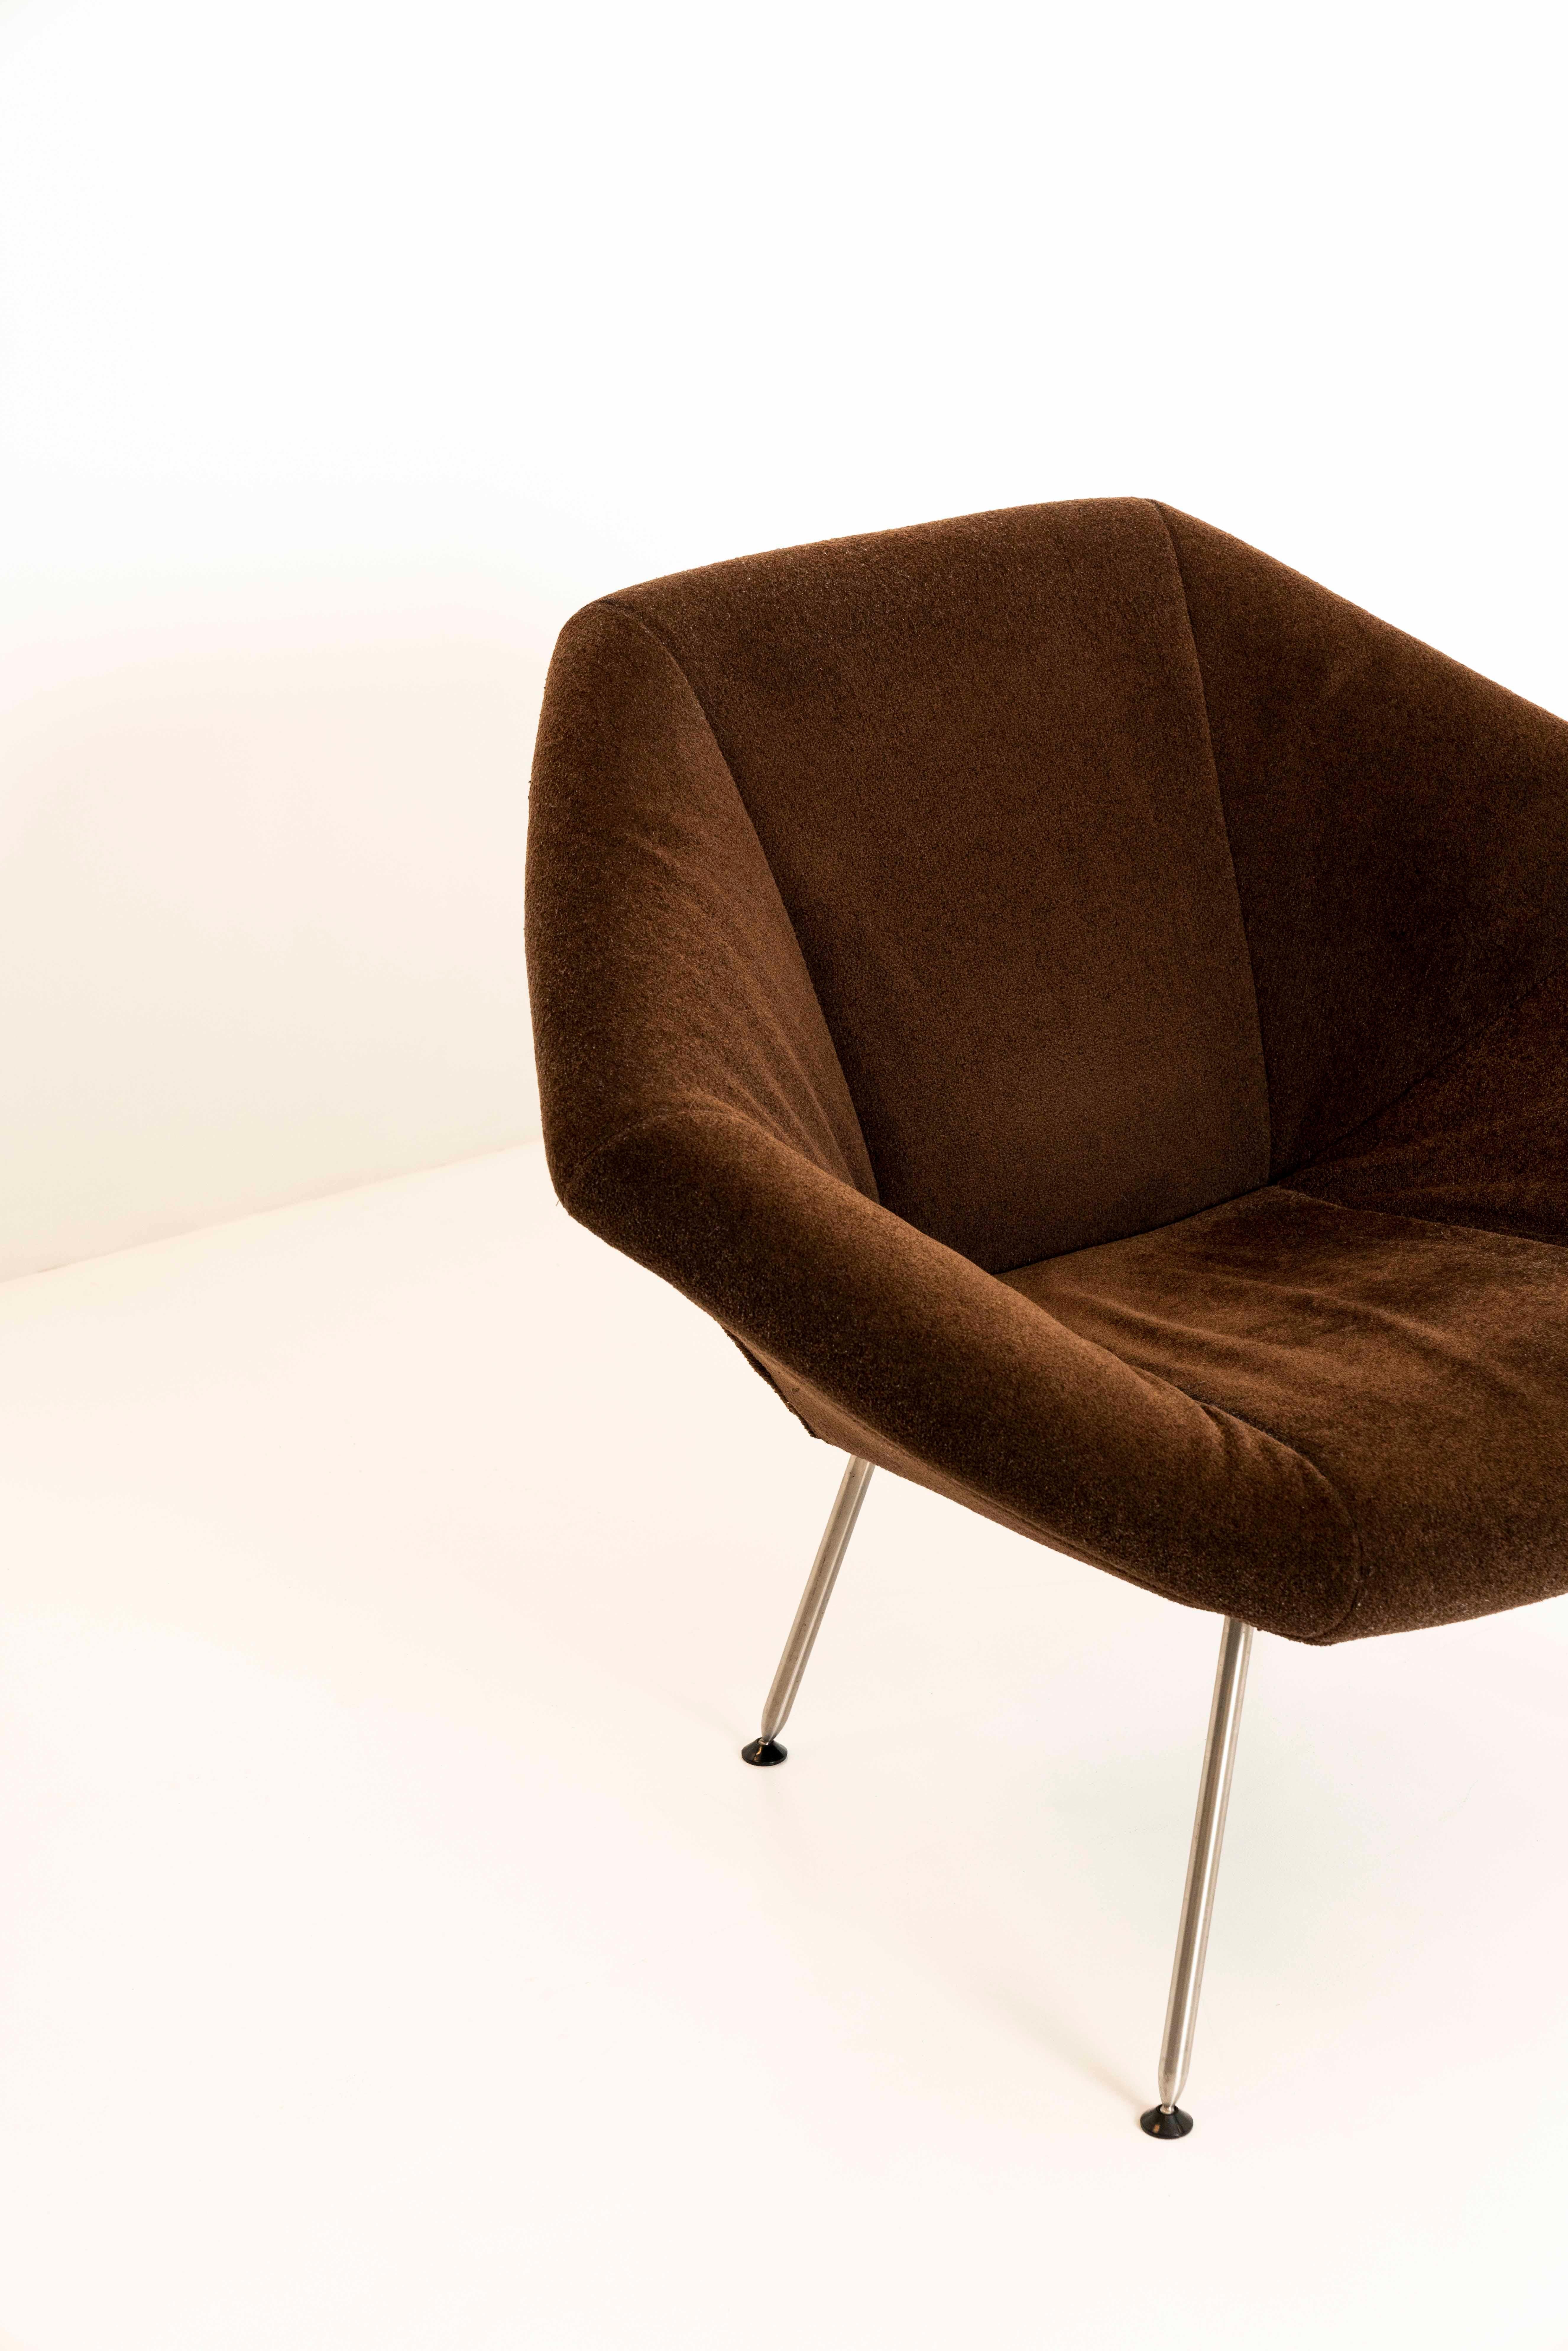 Dutch Lounge Chair by Frans Schrofer for 'Young' in Teddy Fabric, the Netherlands